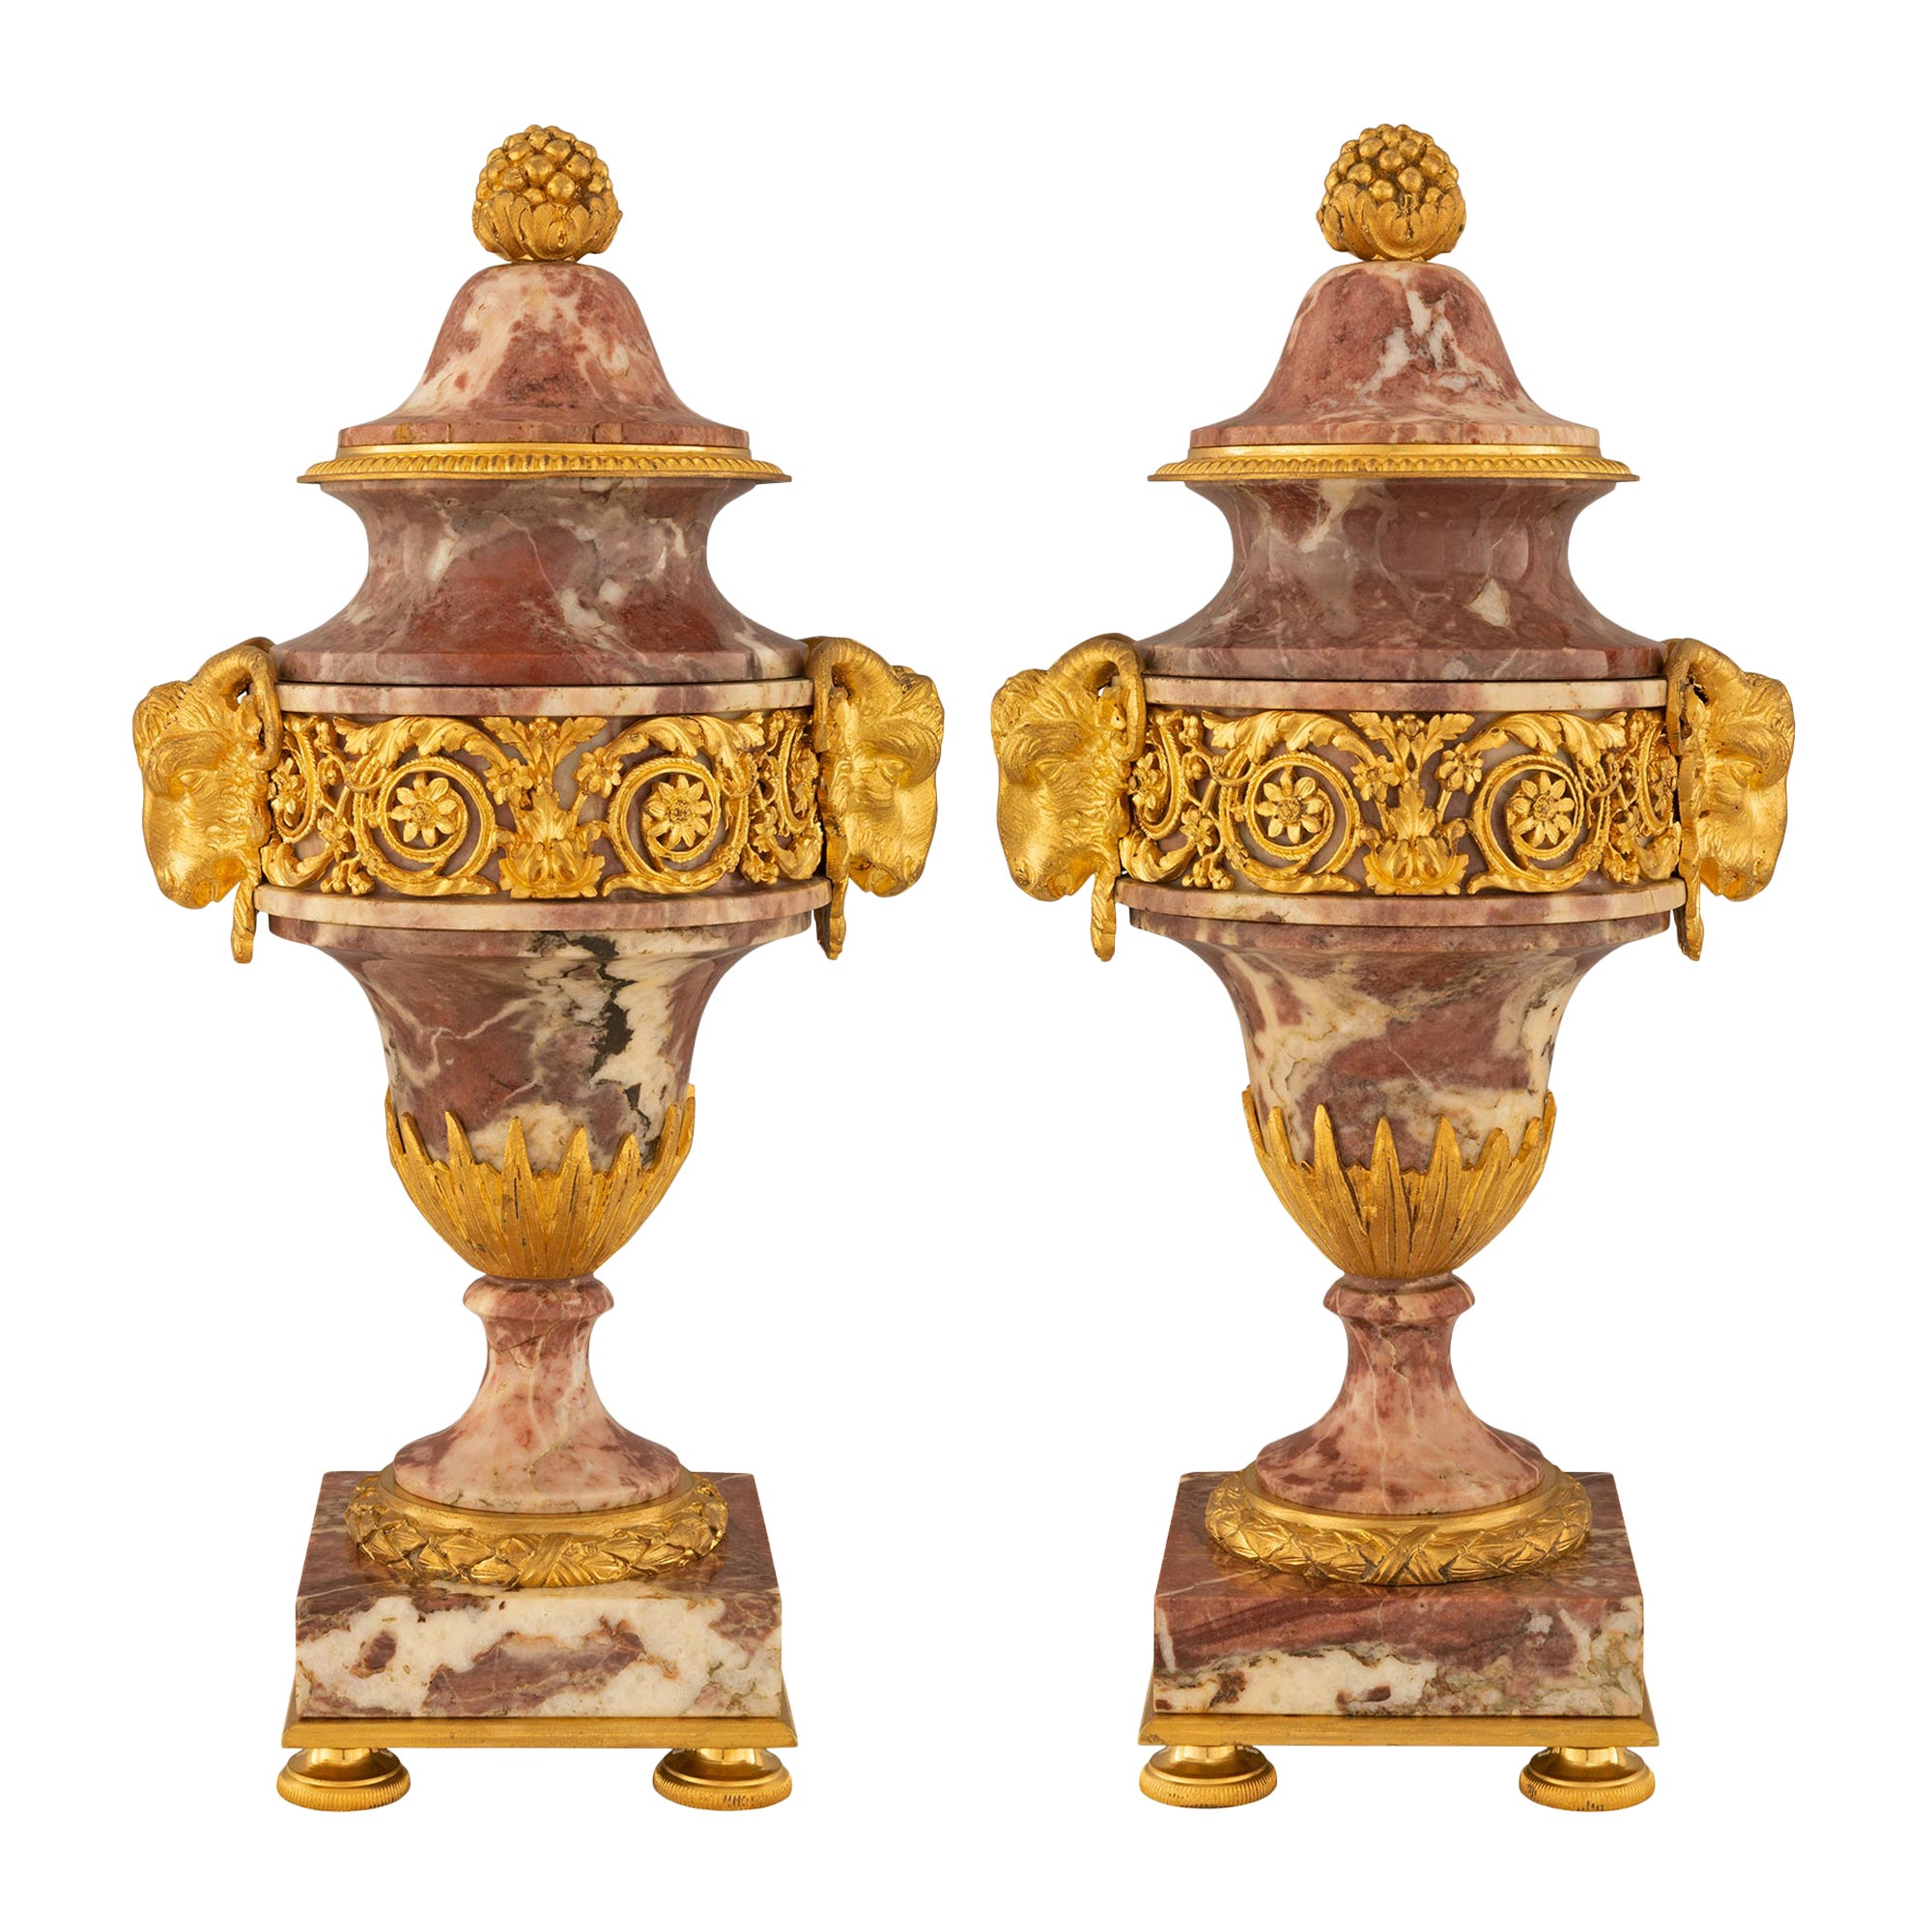 Pair of French 19th Century Louis XVI St. Brèche Violette Marble and Ormolu Urns For Sale